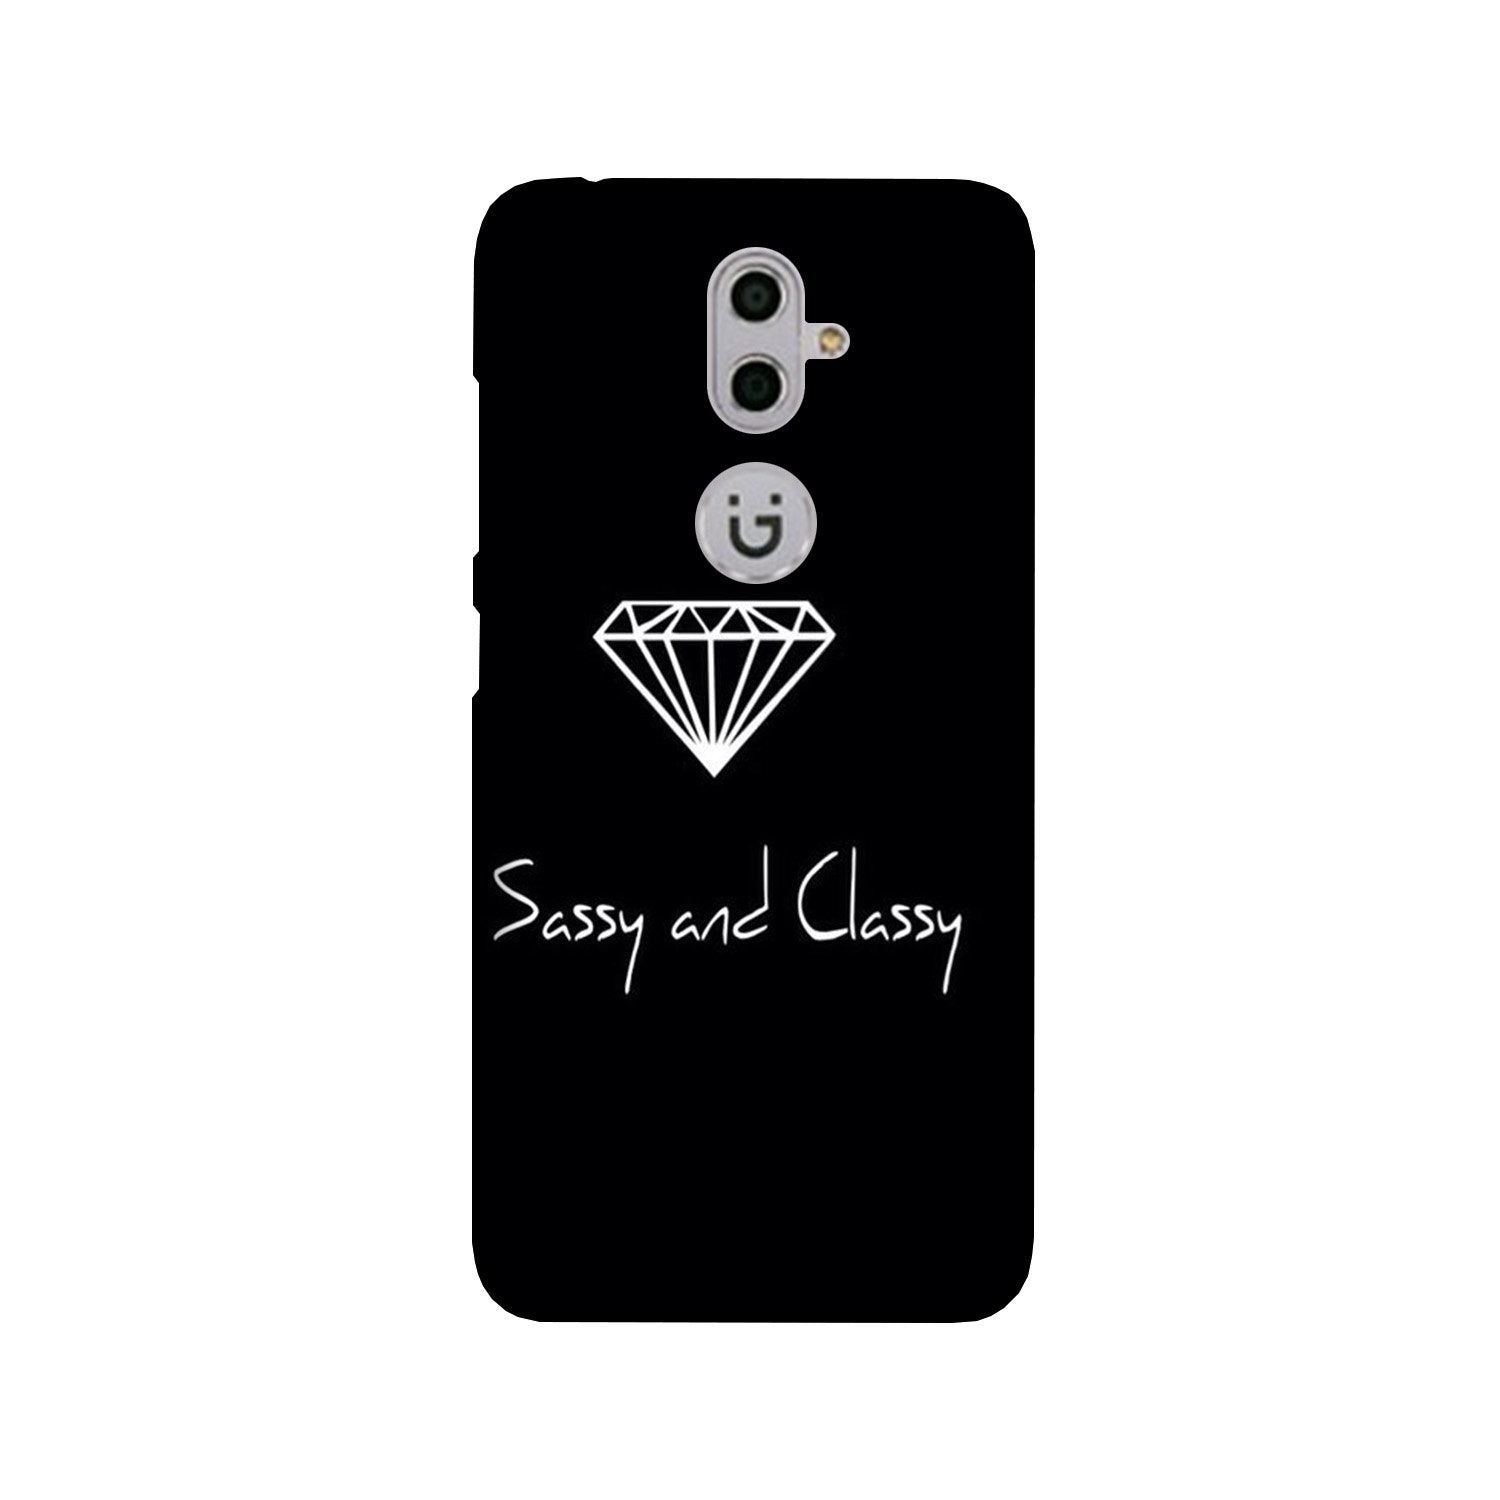 Sassy and Classy Case for Gionee S9 (Design No. 264)